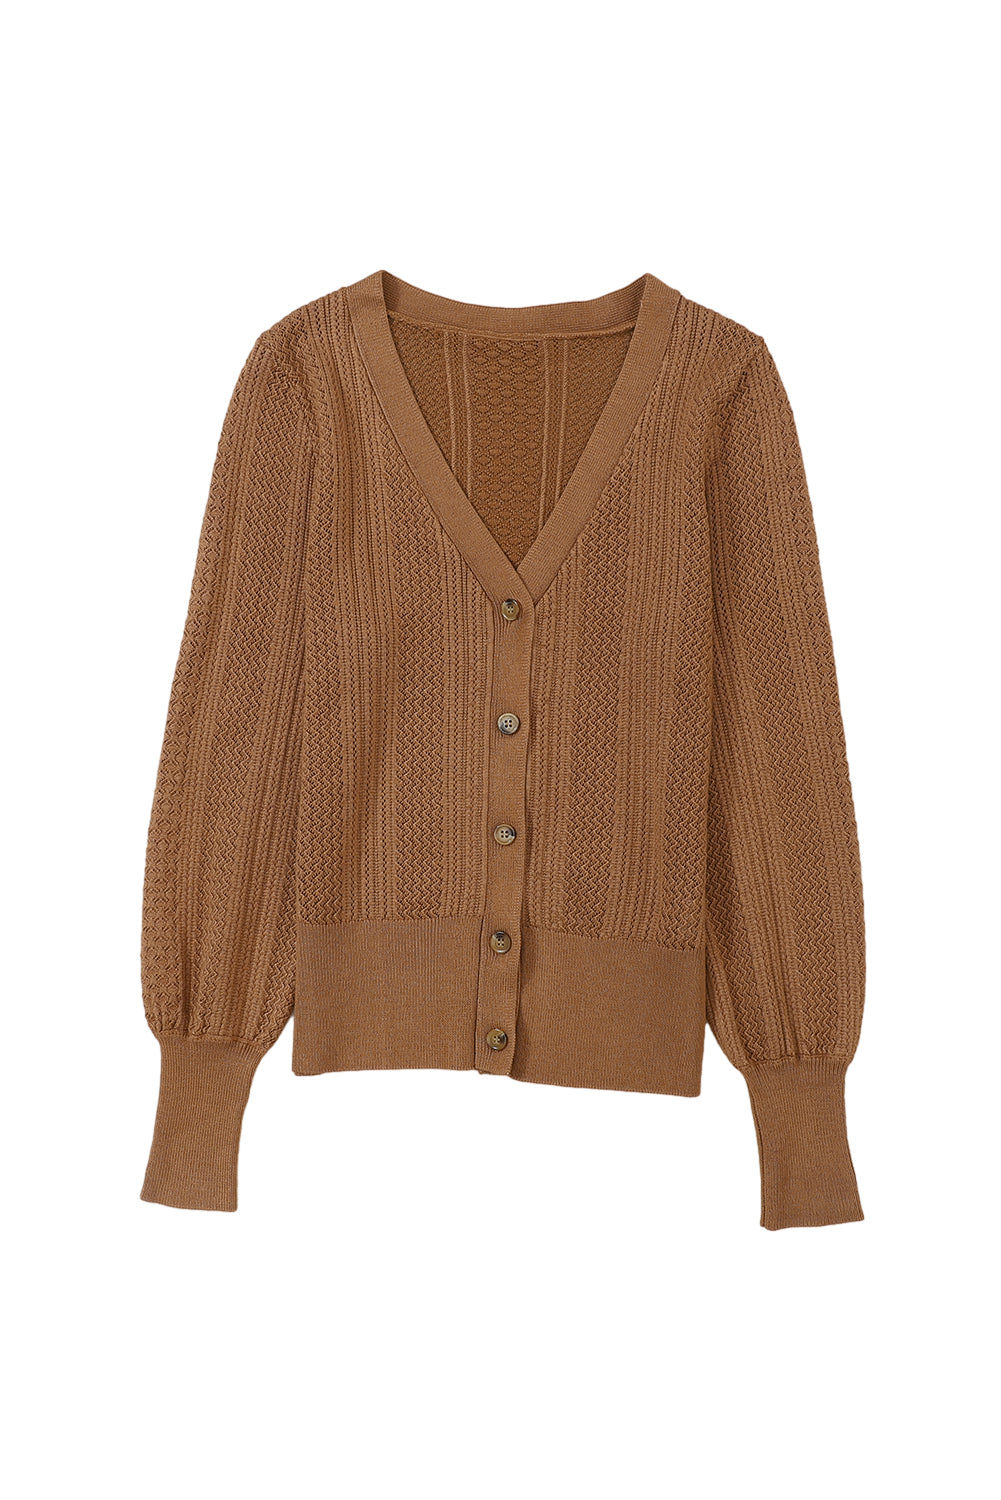 Cypress Casual V Neck Buttoned Up Textured Cardigan